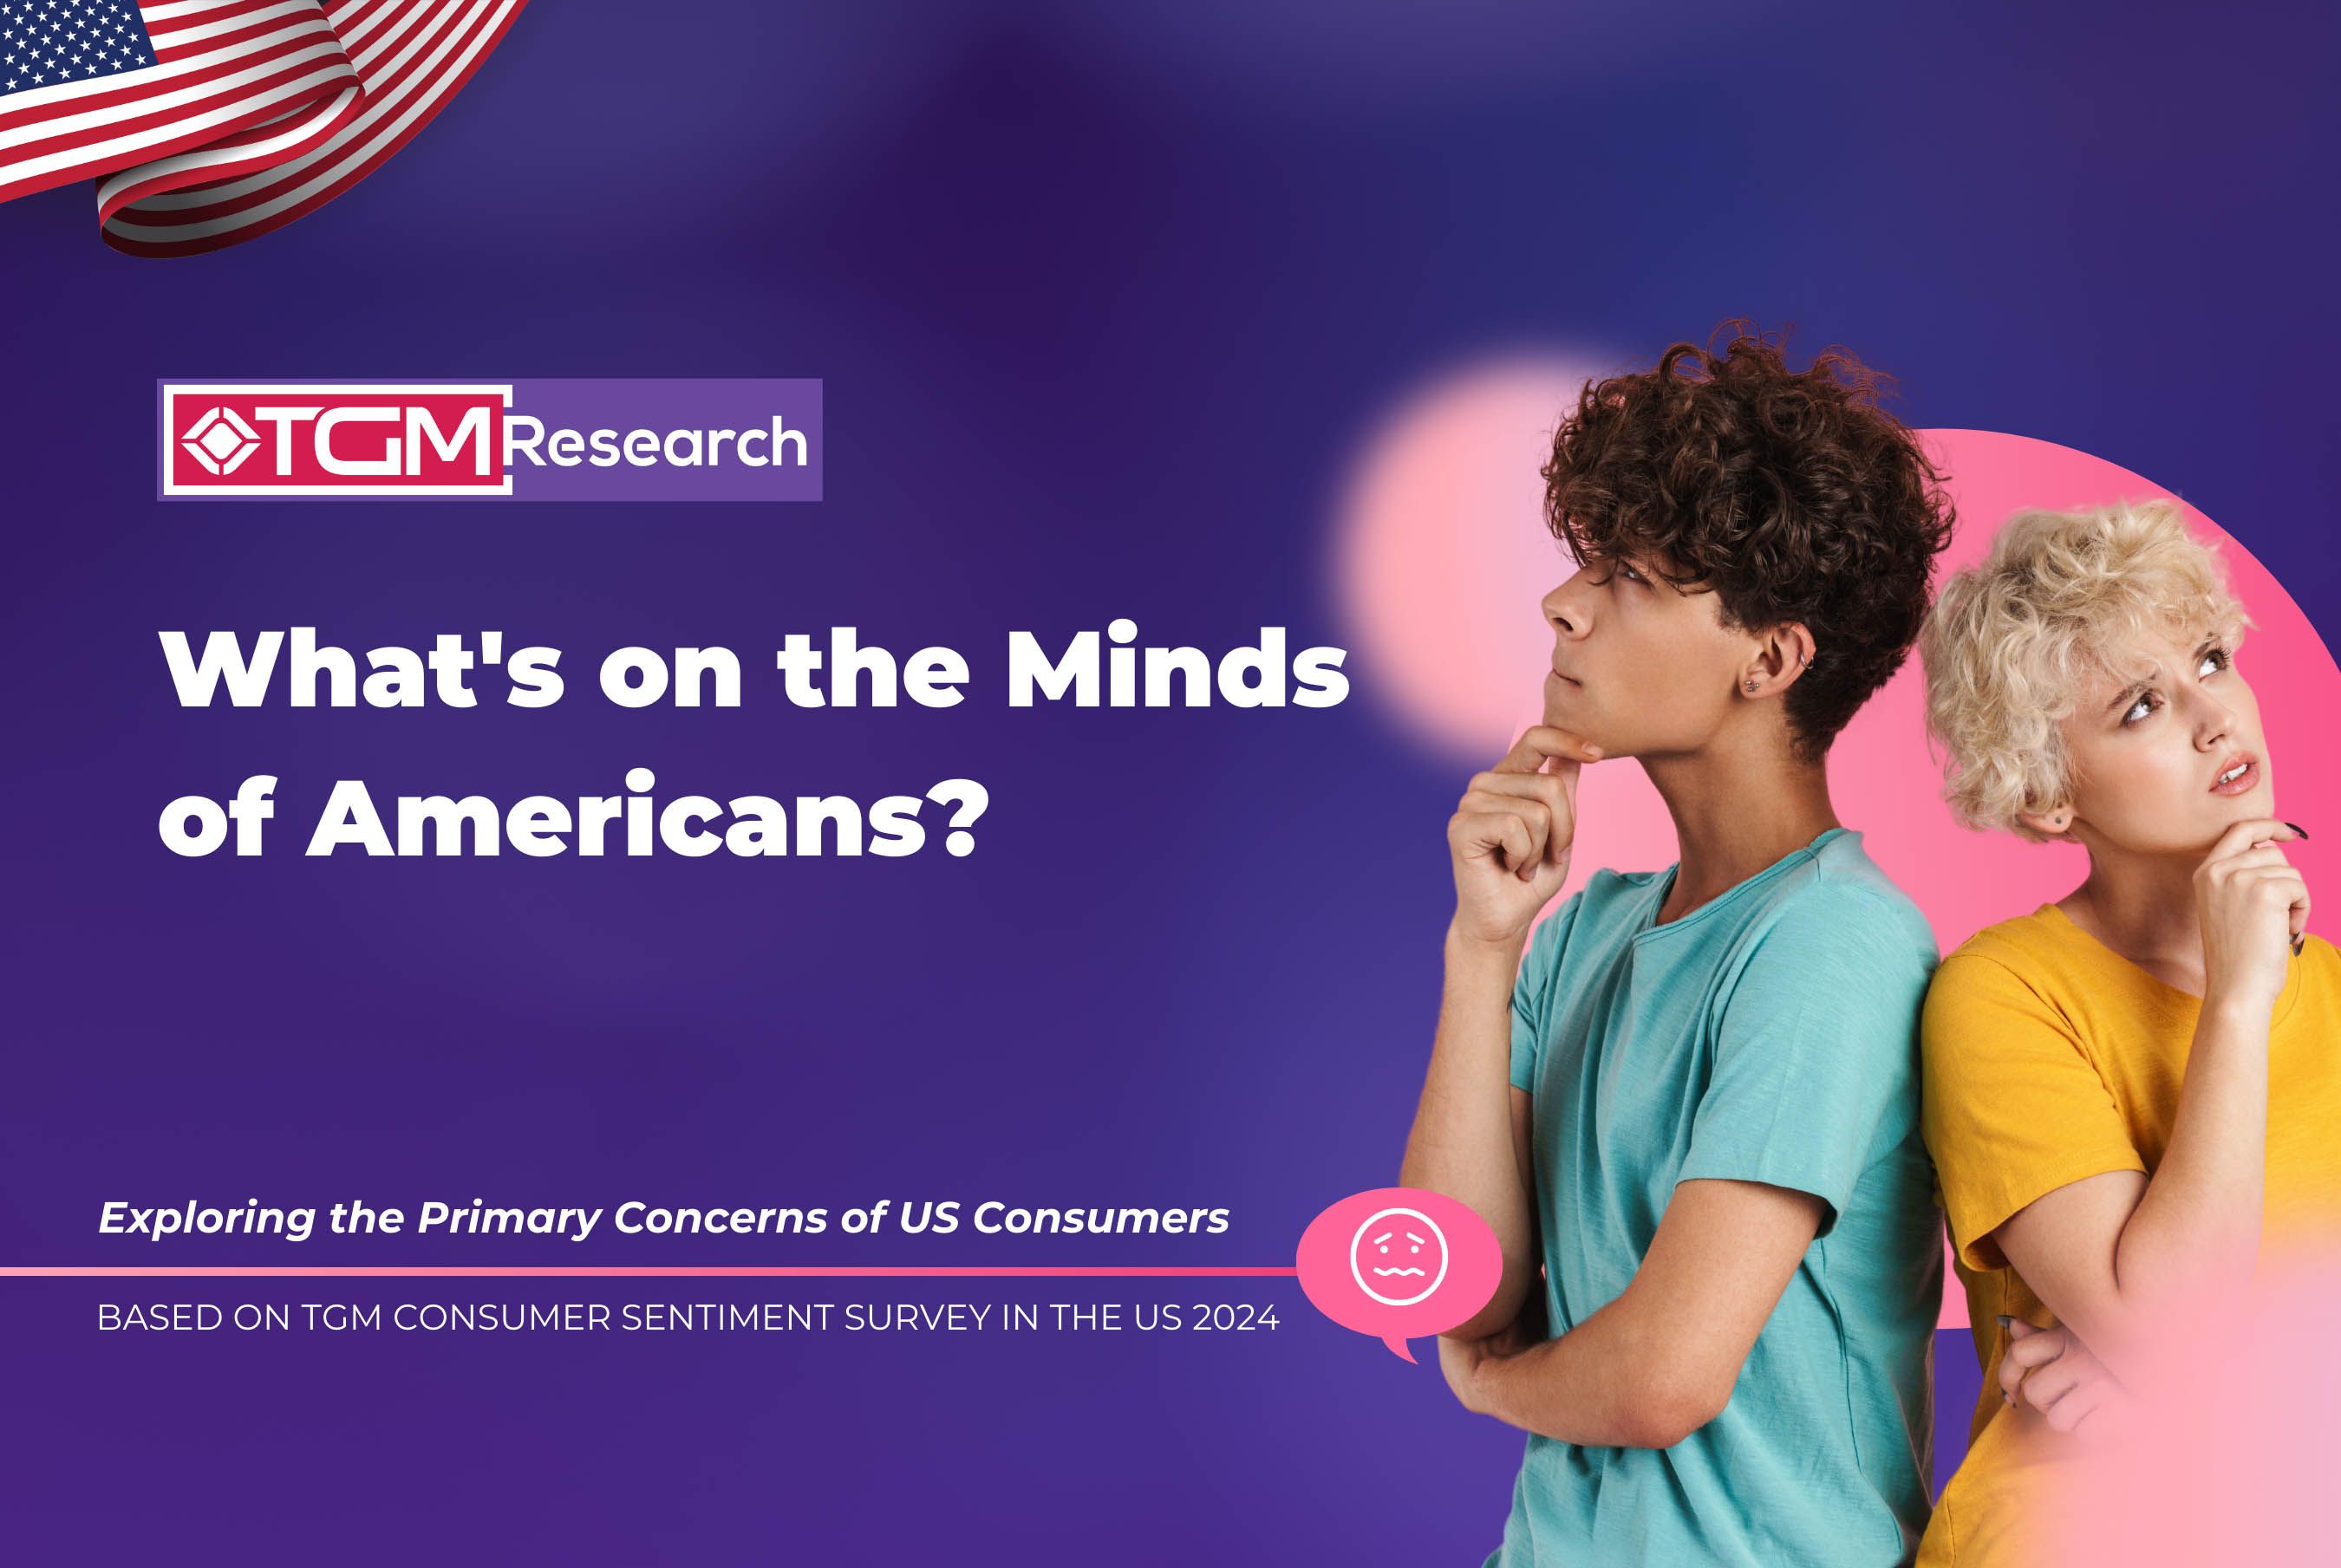 What's on the Minds of Americans?